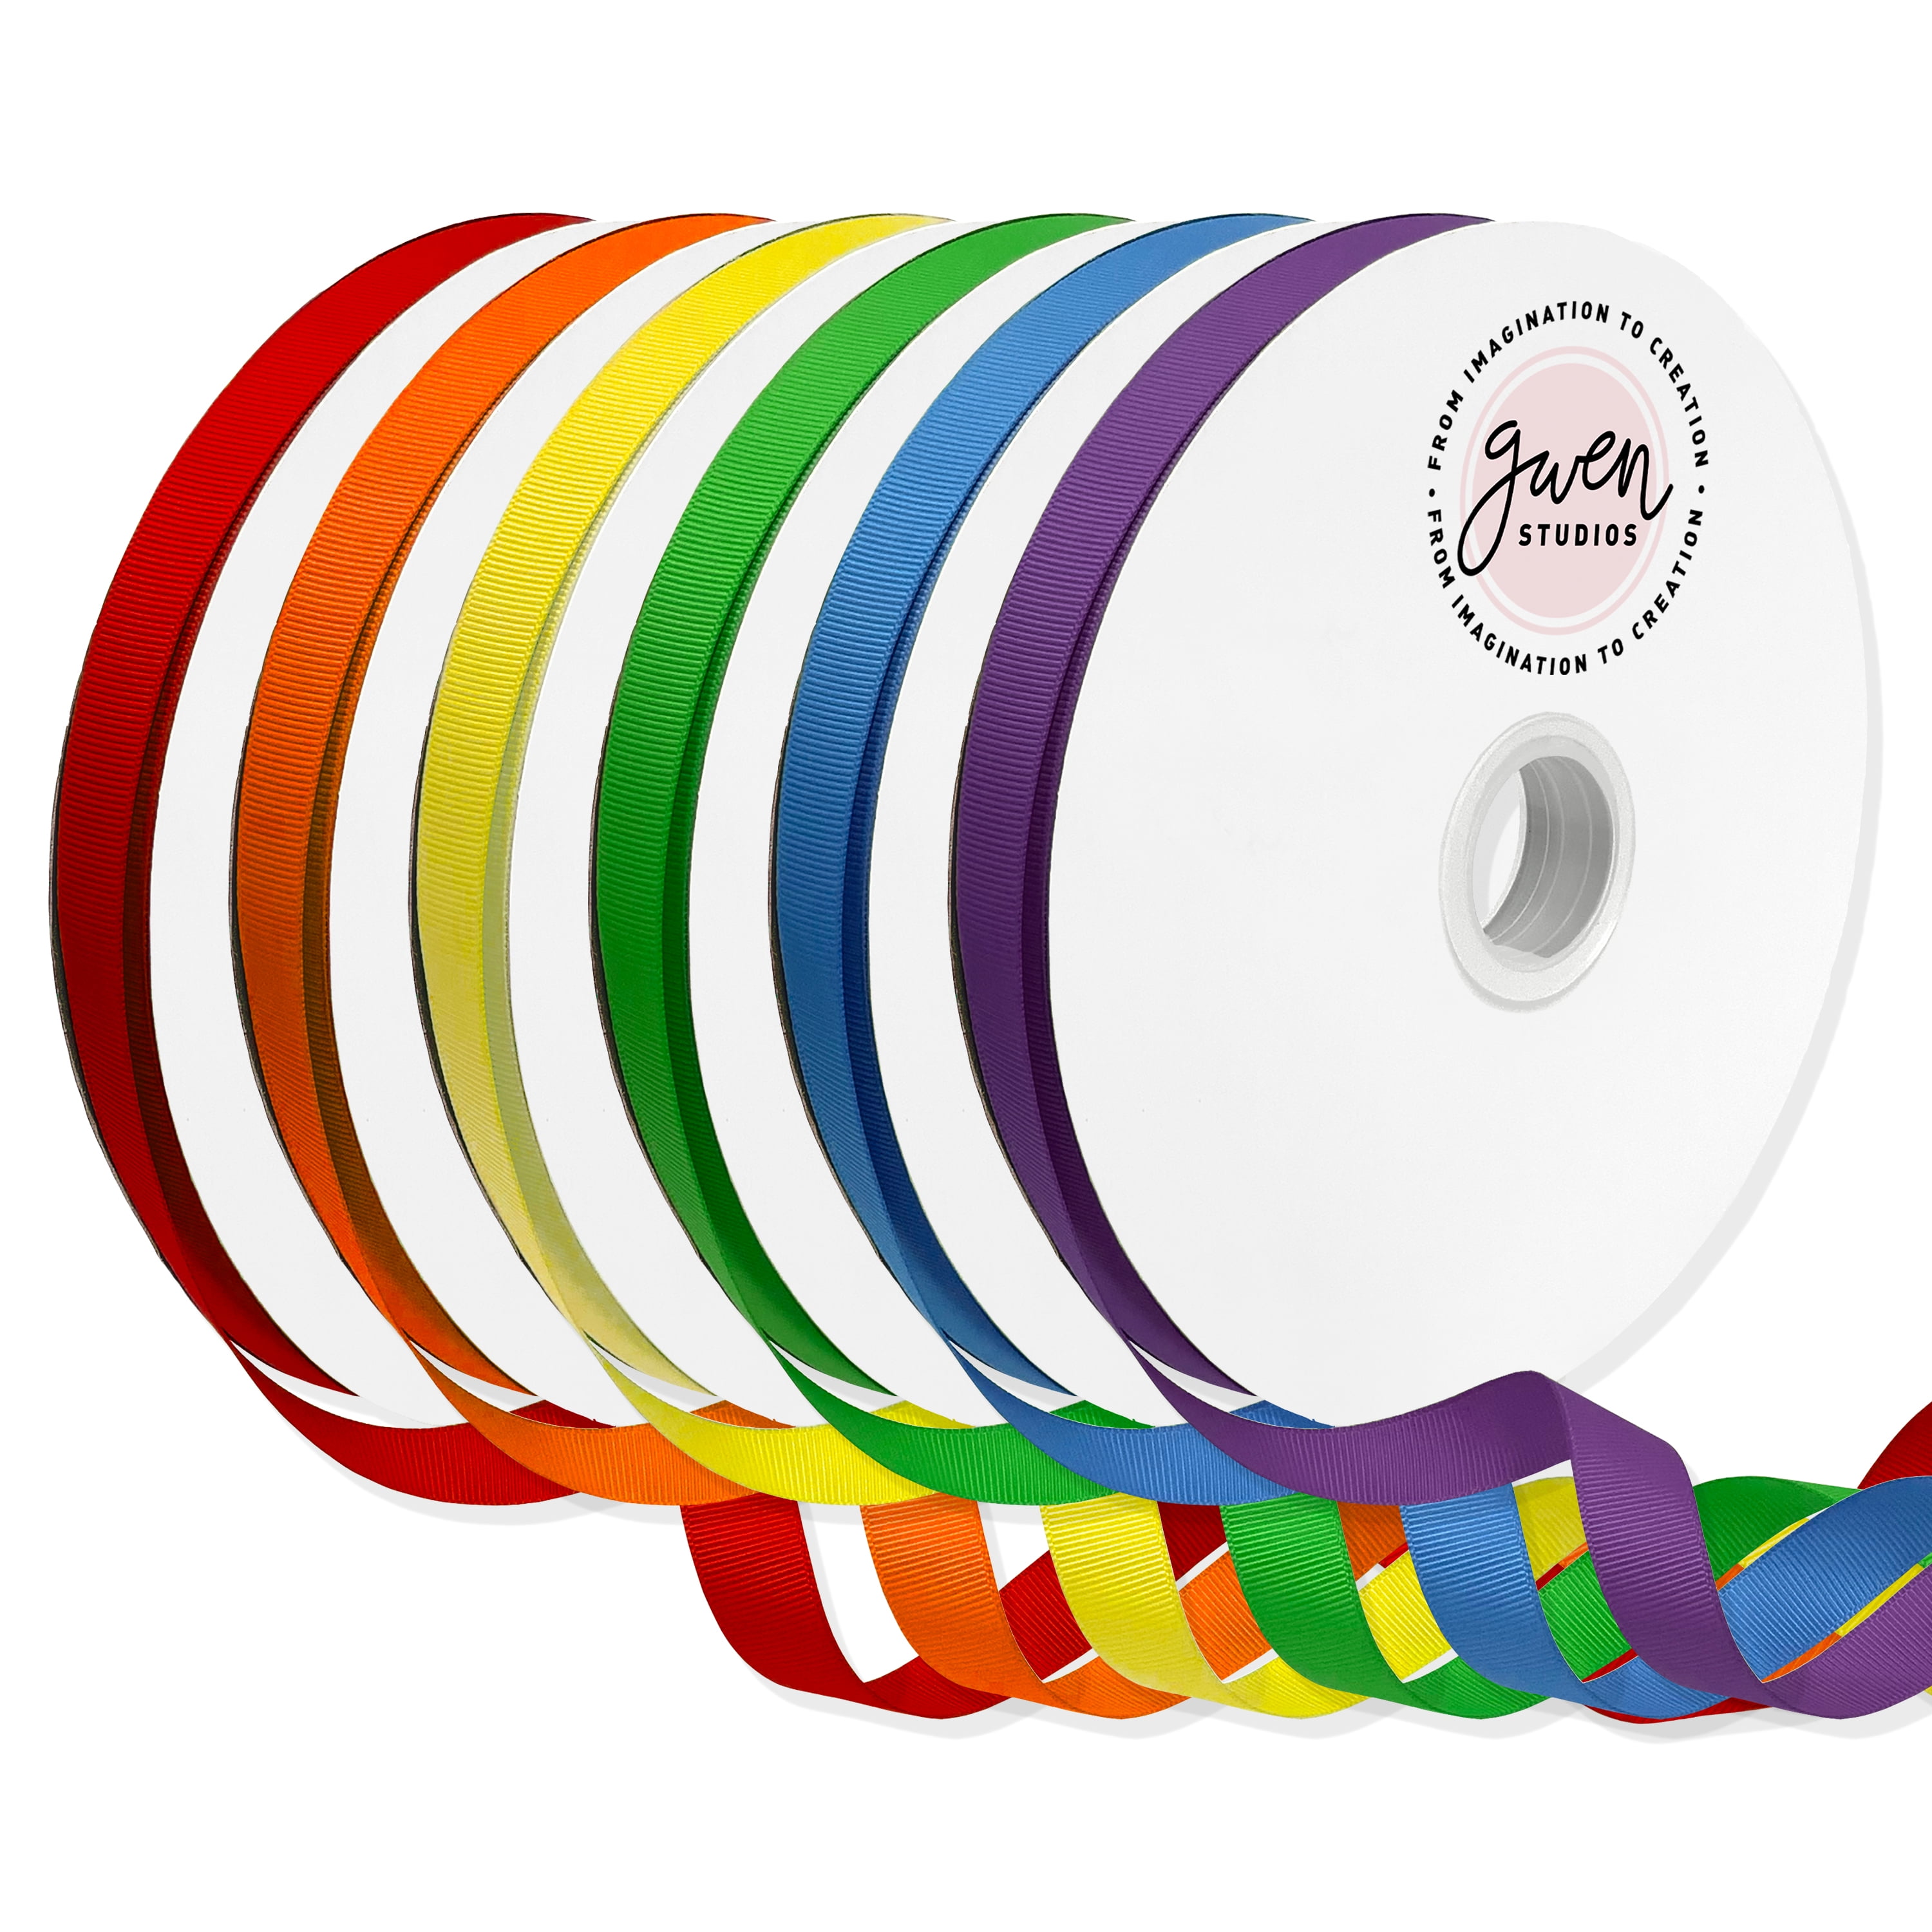 Grosgrain Ribbon for Crafts and Bows, 12 Pastel Colors, 3/8 inch x 36 Yards by Gwen Studios